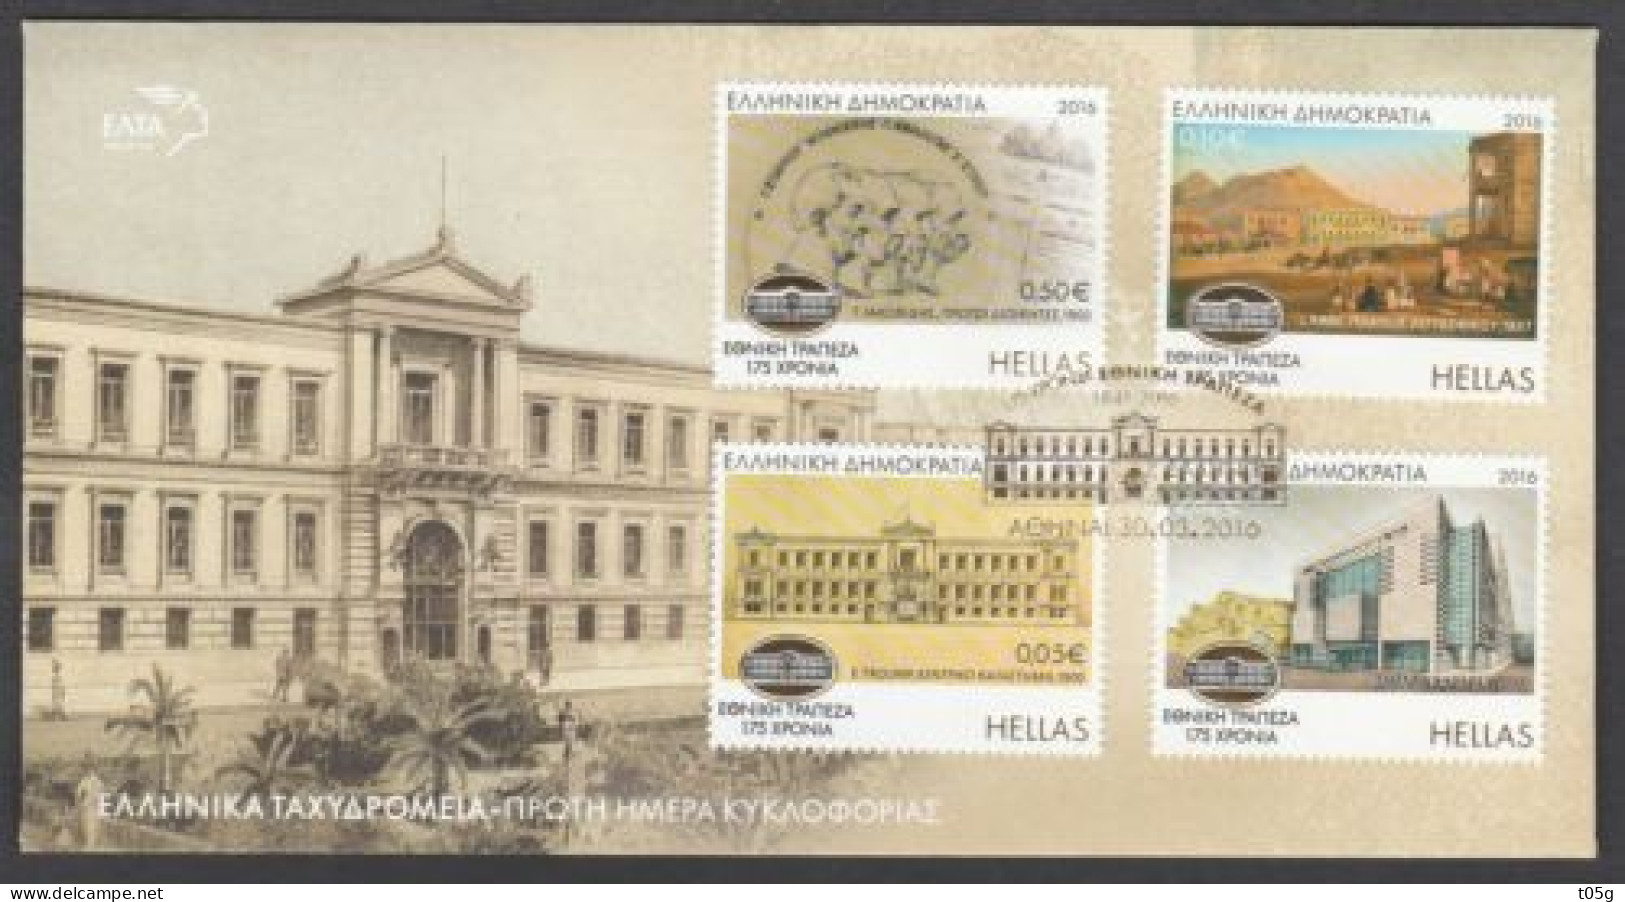 GREECE-GRECE- HELLAS- (FDC: 30- 03-2016) For 175 Yeats Since The Fouling Of The Natiomalk Bank Of Greece - FDC